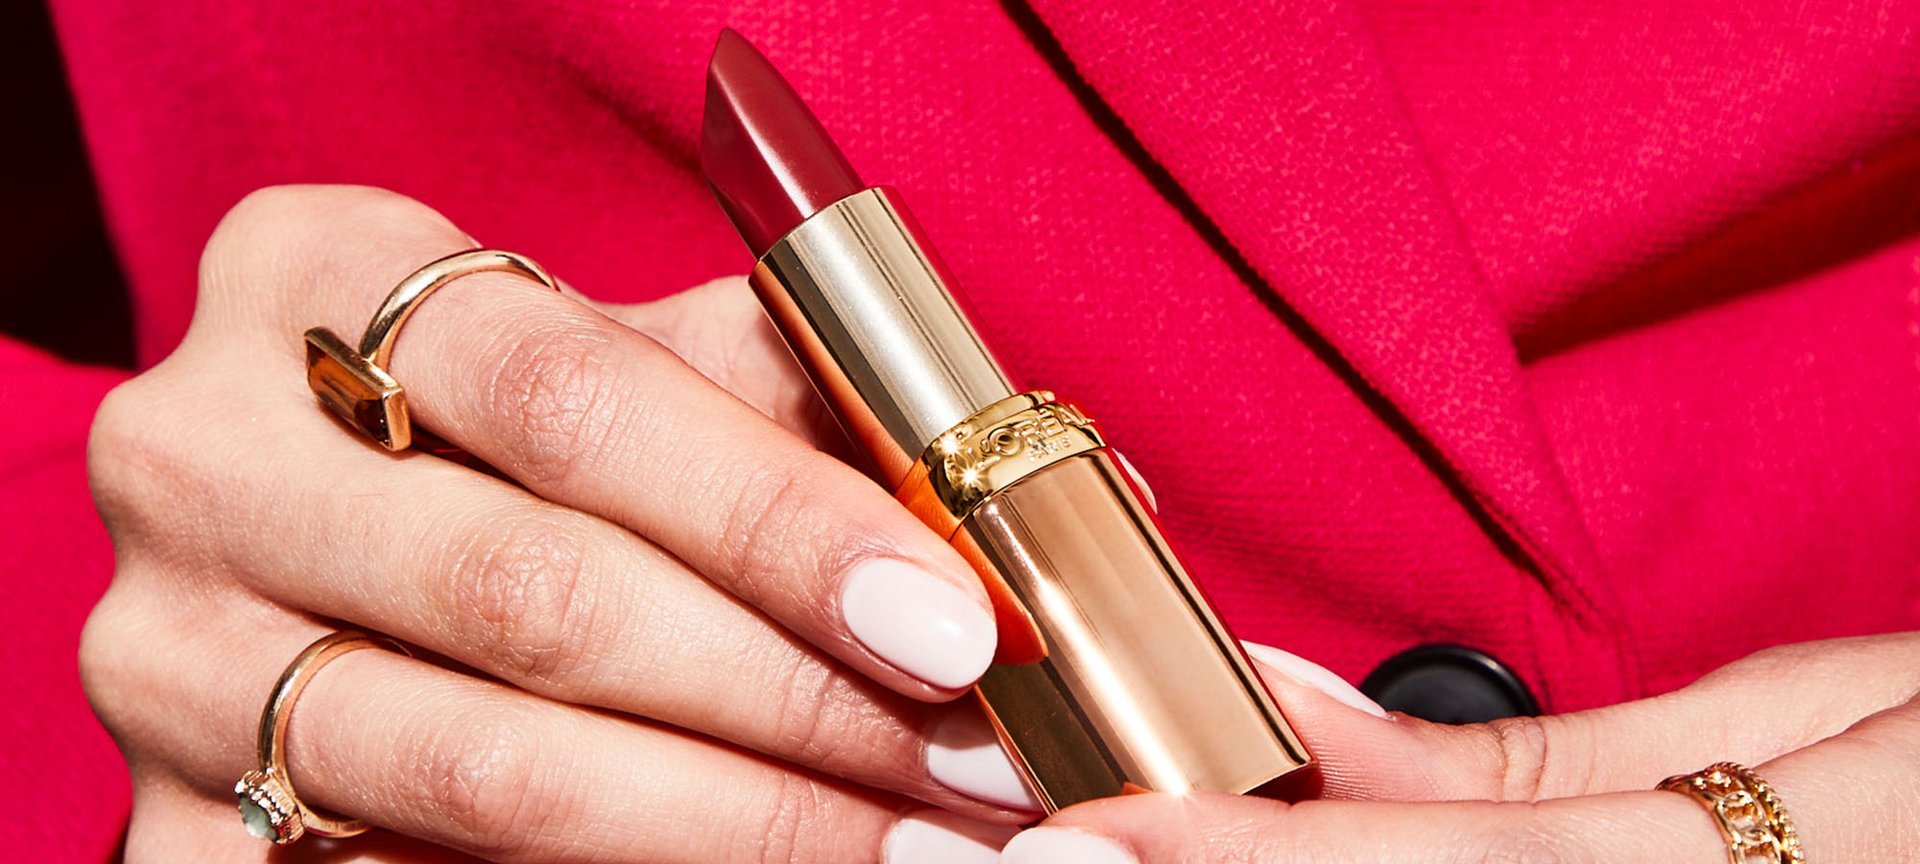 Lipstick Finder, How to Find the Perfect Lip Color - Clarins